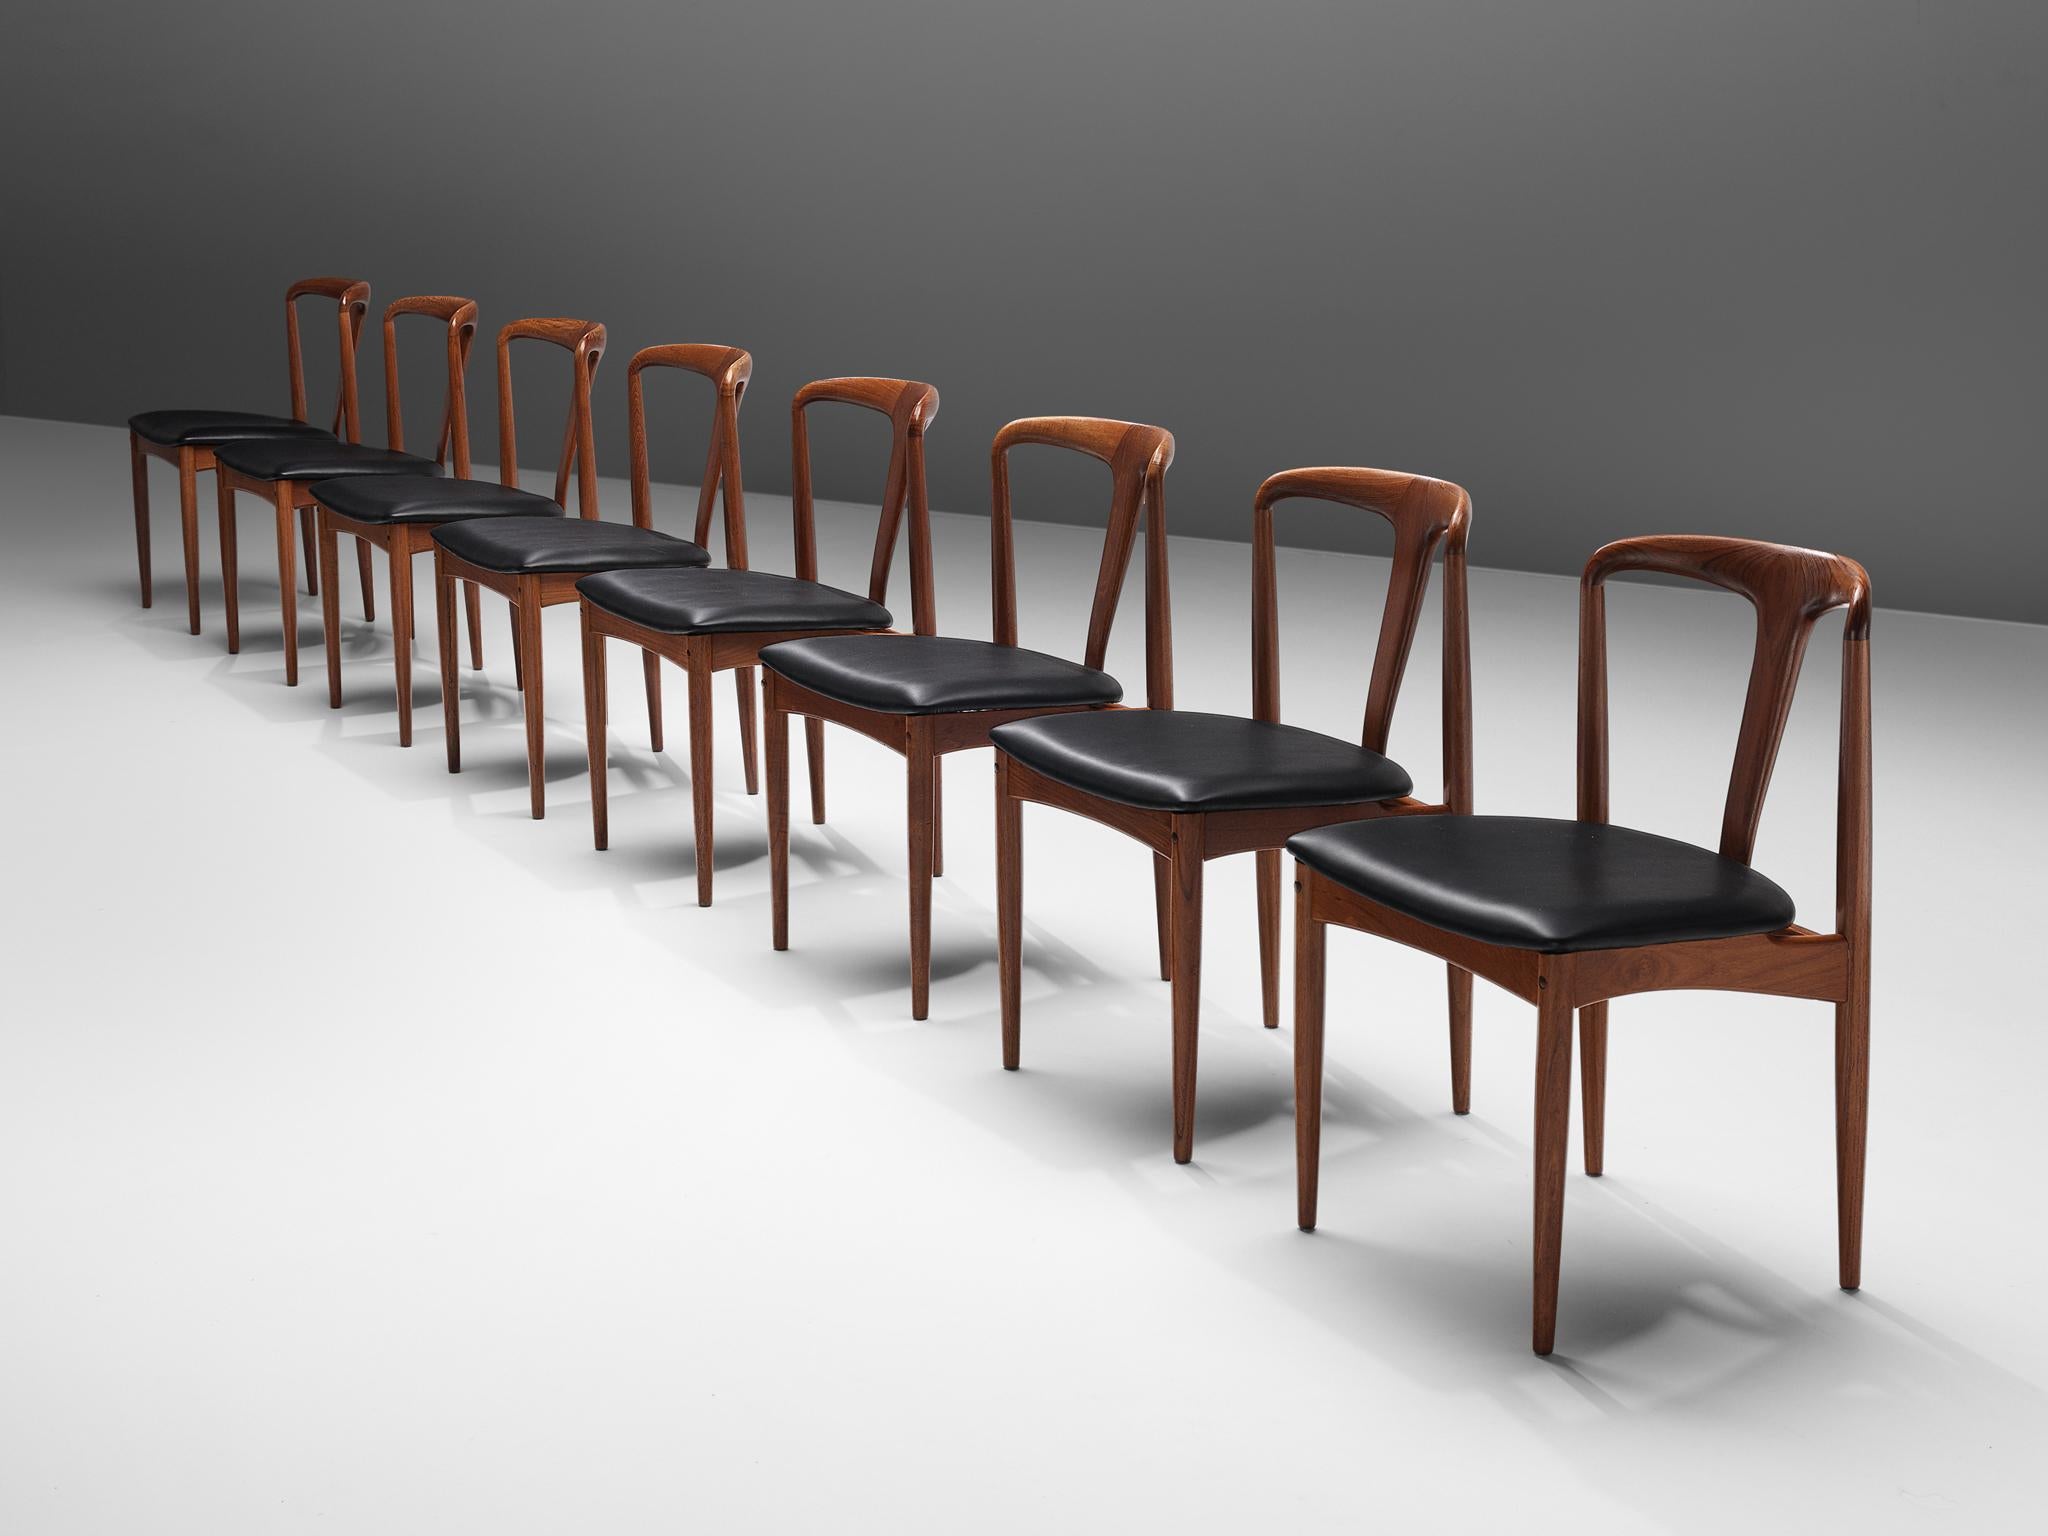 Johannes Andersen for Uldum Møbelfabrik, 'Juliane' set of 8 dining chairs, teak and leather, Denmark, 1960s.

This set of 8 dining chairs is designed by Danish Johannes Andersen and produced by Uldum Møbelfrabrik in Denmark. The set is executed in